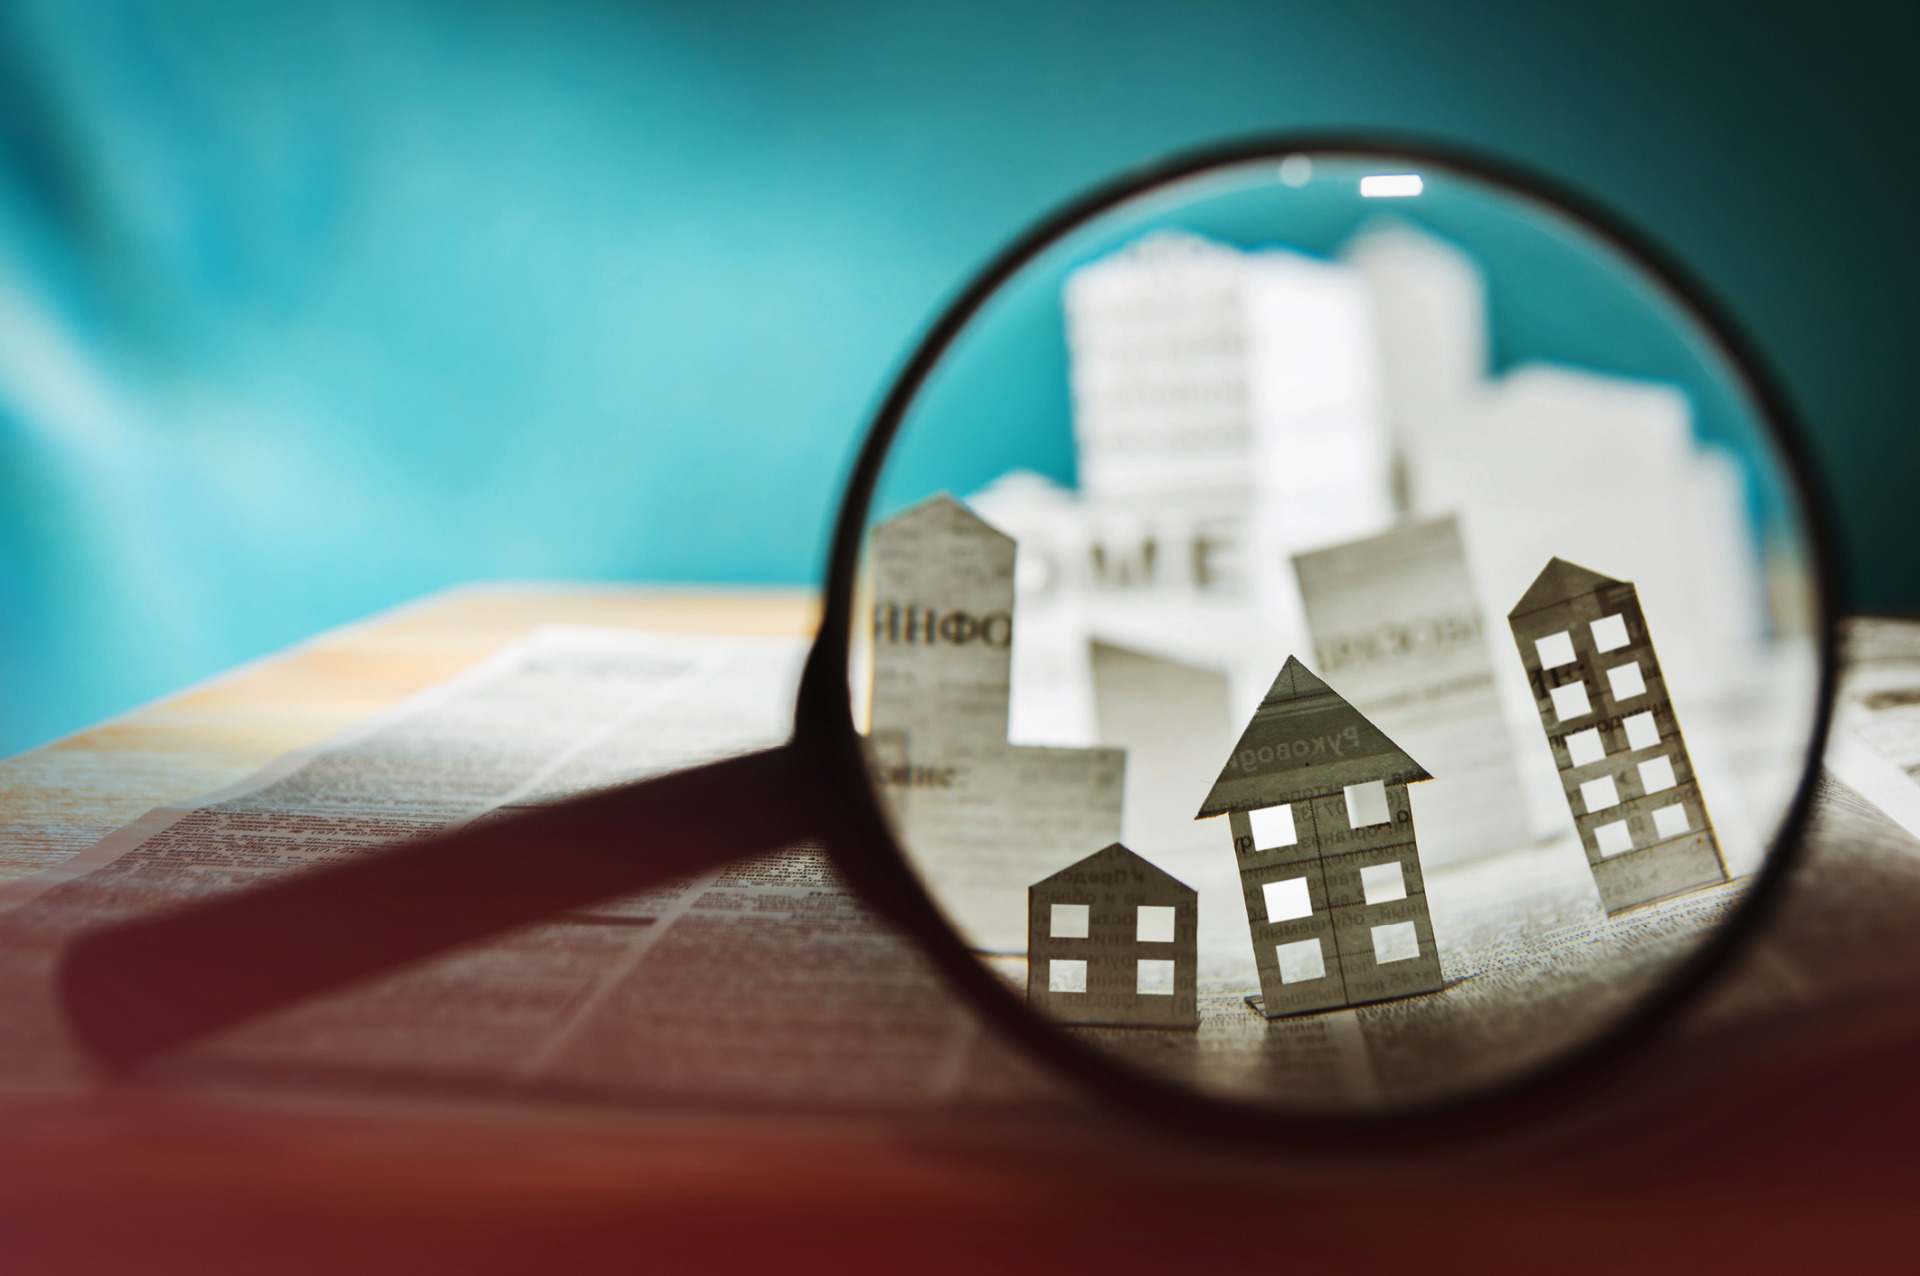 A magnifying glass looking at a book, with cut out miniature houses.